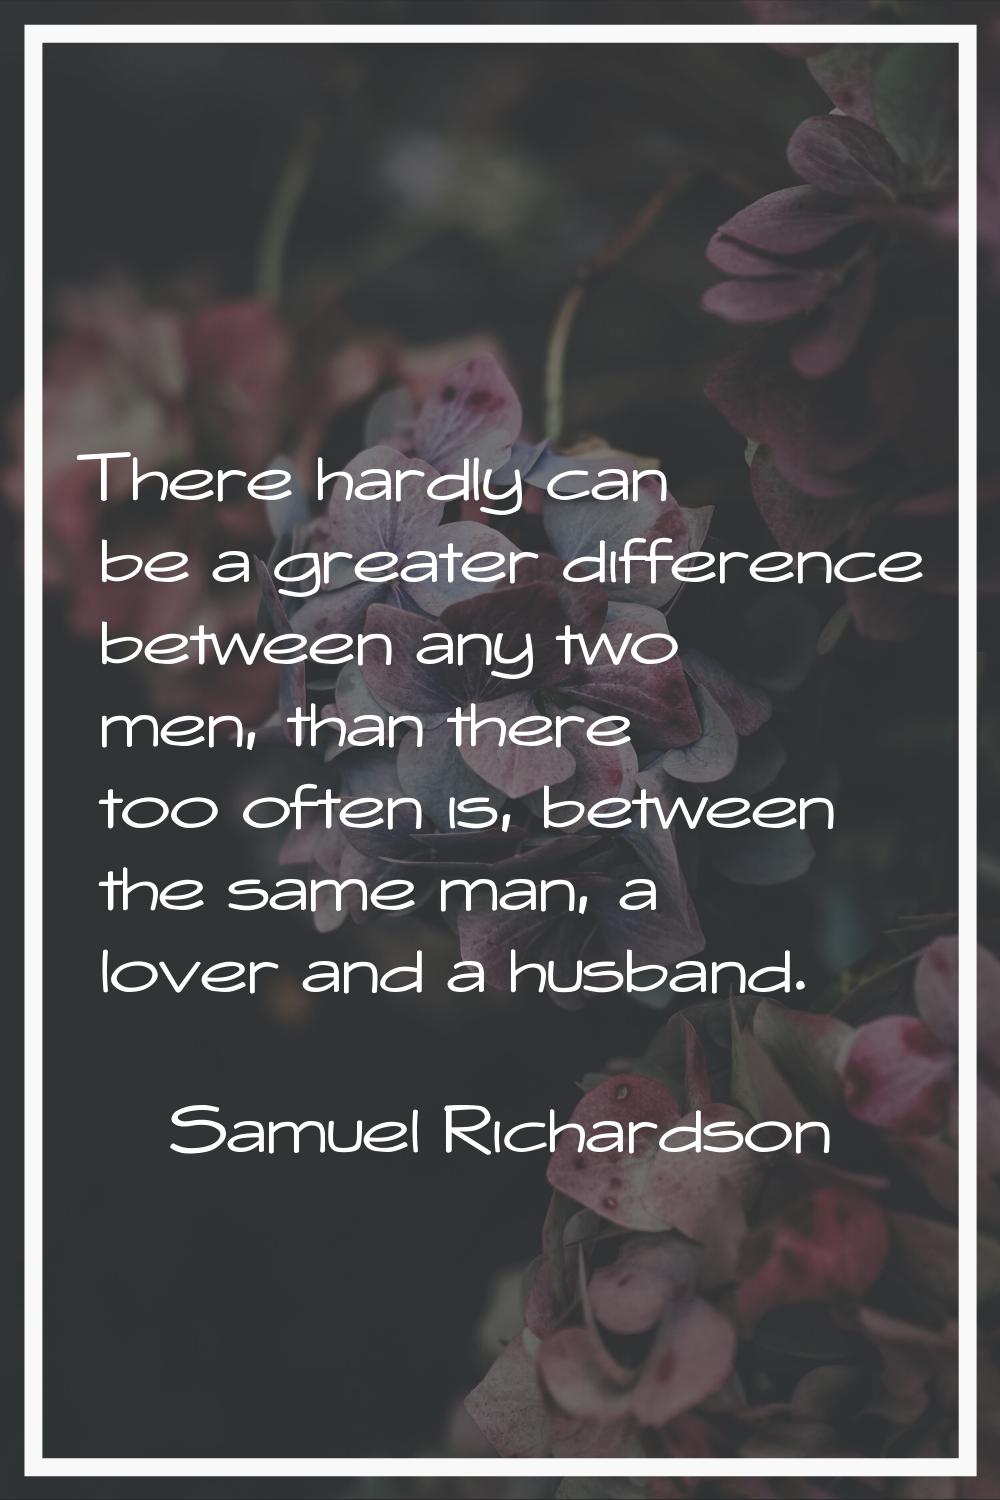 There hardly can be a greater difference between any two men, than there too often is, between the 